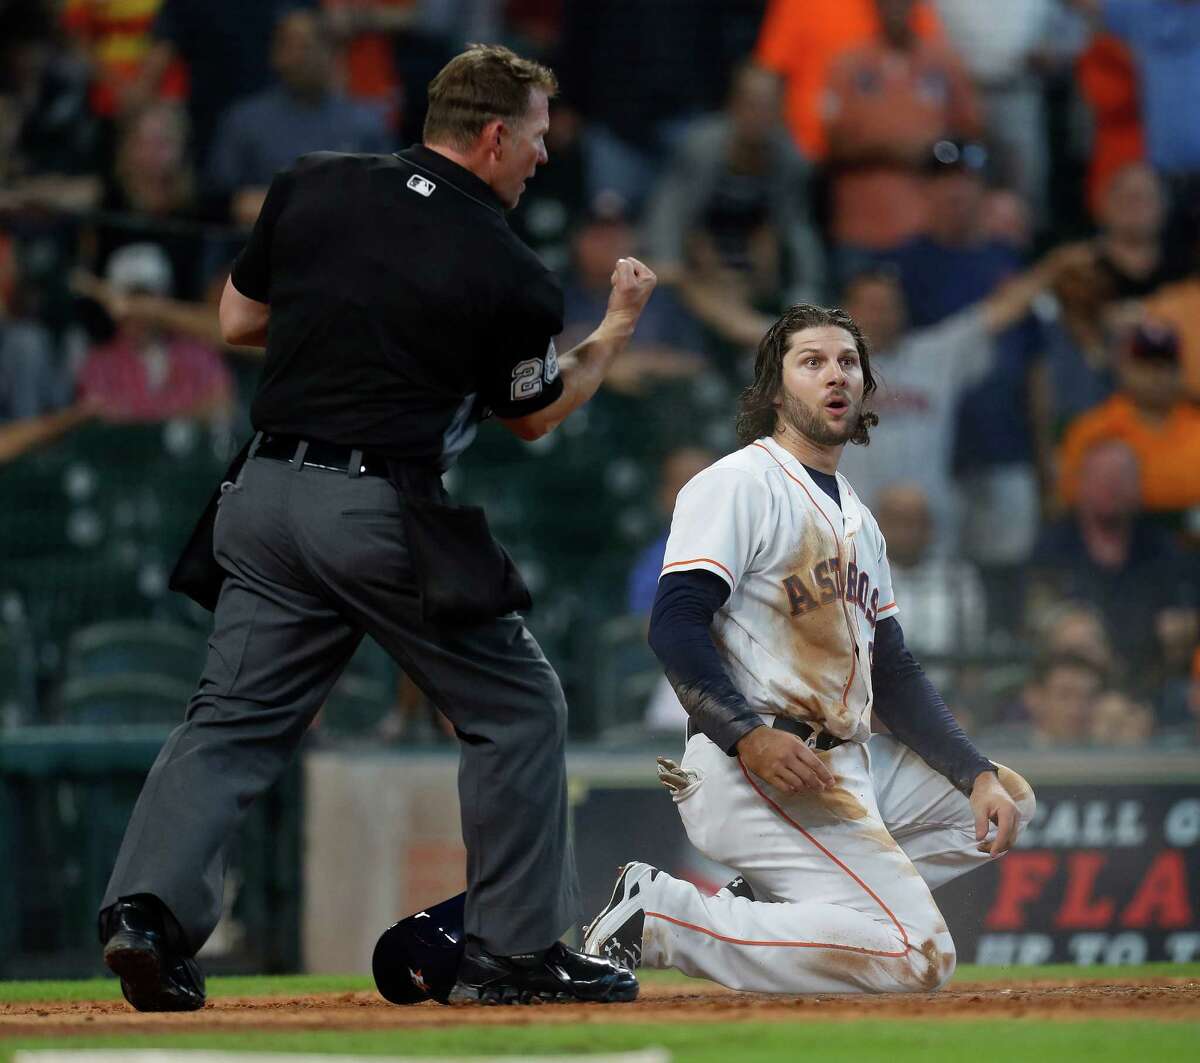 Home plate umpire Jim Wolf calls Houston Astros Jake Marisnick (6) out at home on a play later challenged and overturned during the fifth inning of an MLB game at Minute Maid Park, Wednesday, Sept. 28, 2016 in Houston.